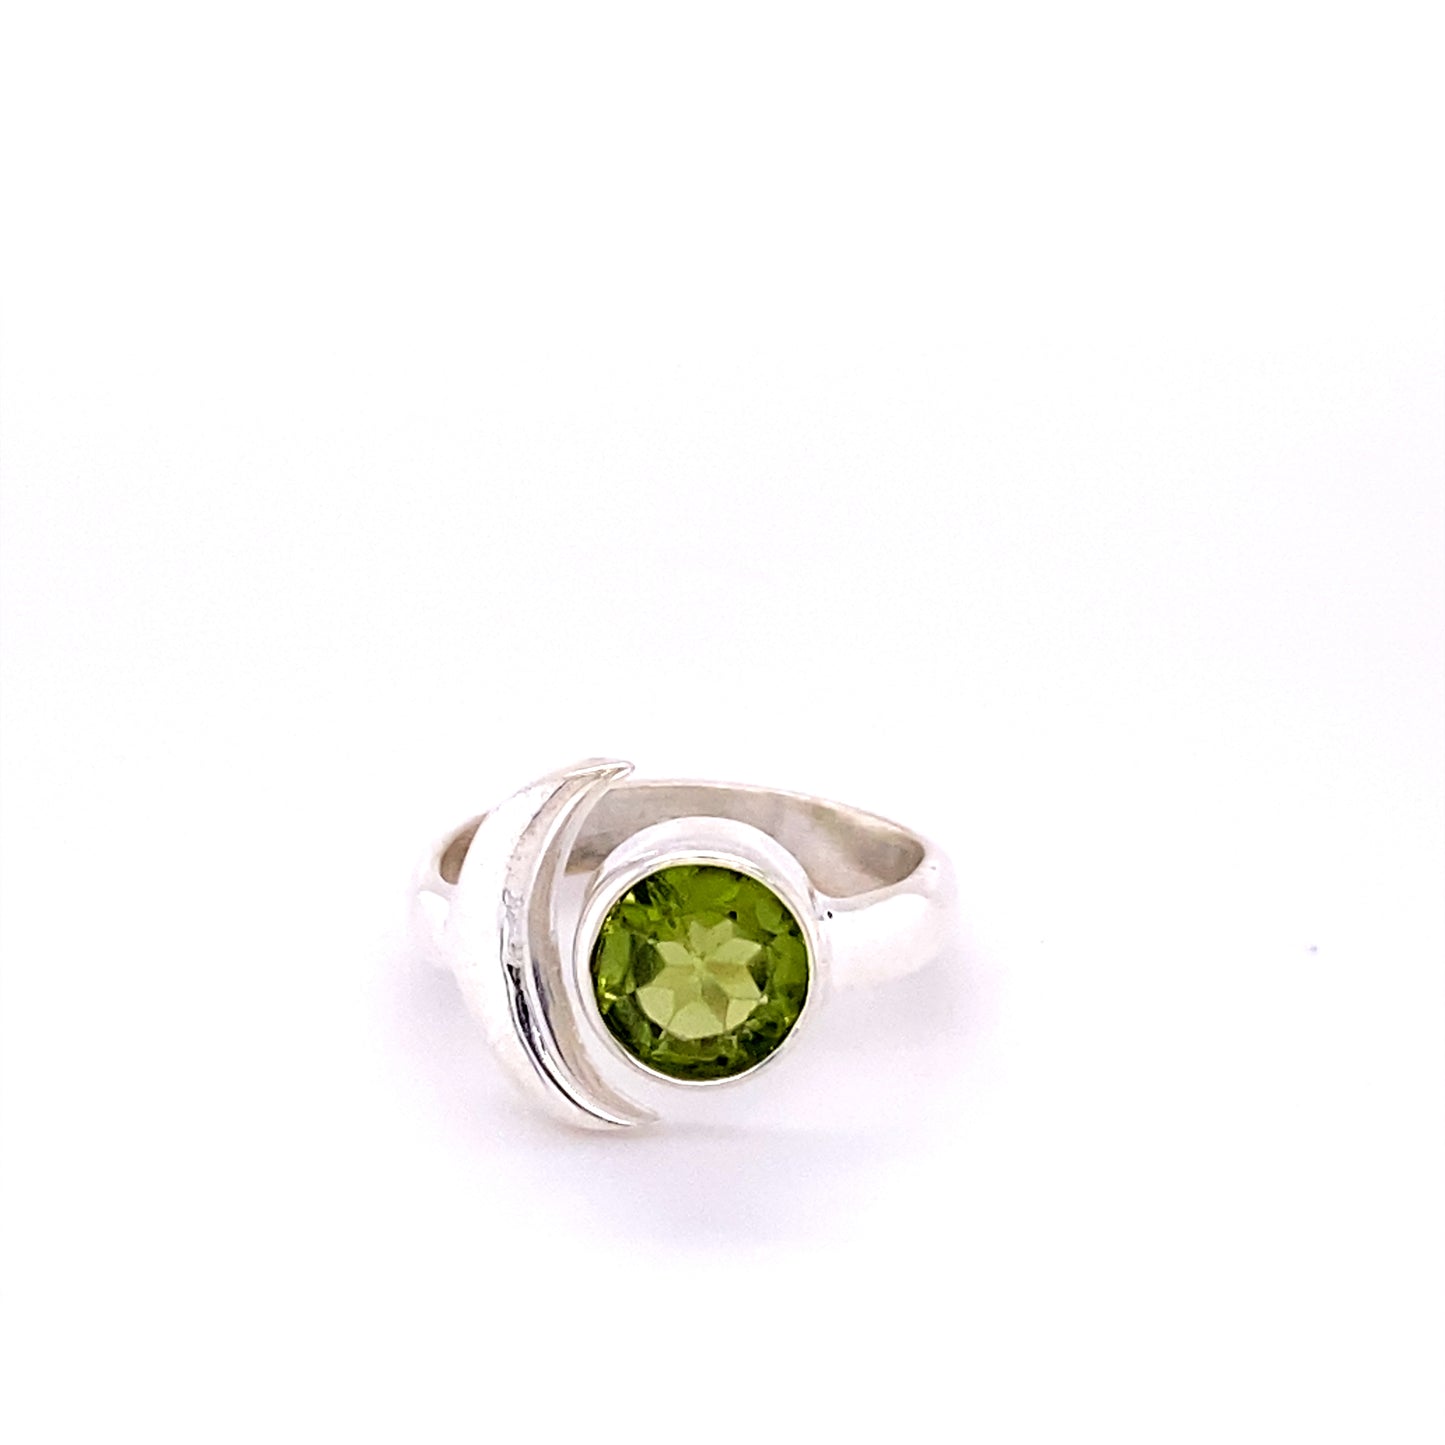 A Crescent Moon Ring with Natural Gemstones, perfect for boho style enthusiasts looking for unique cabochon jewelry.